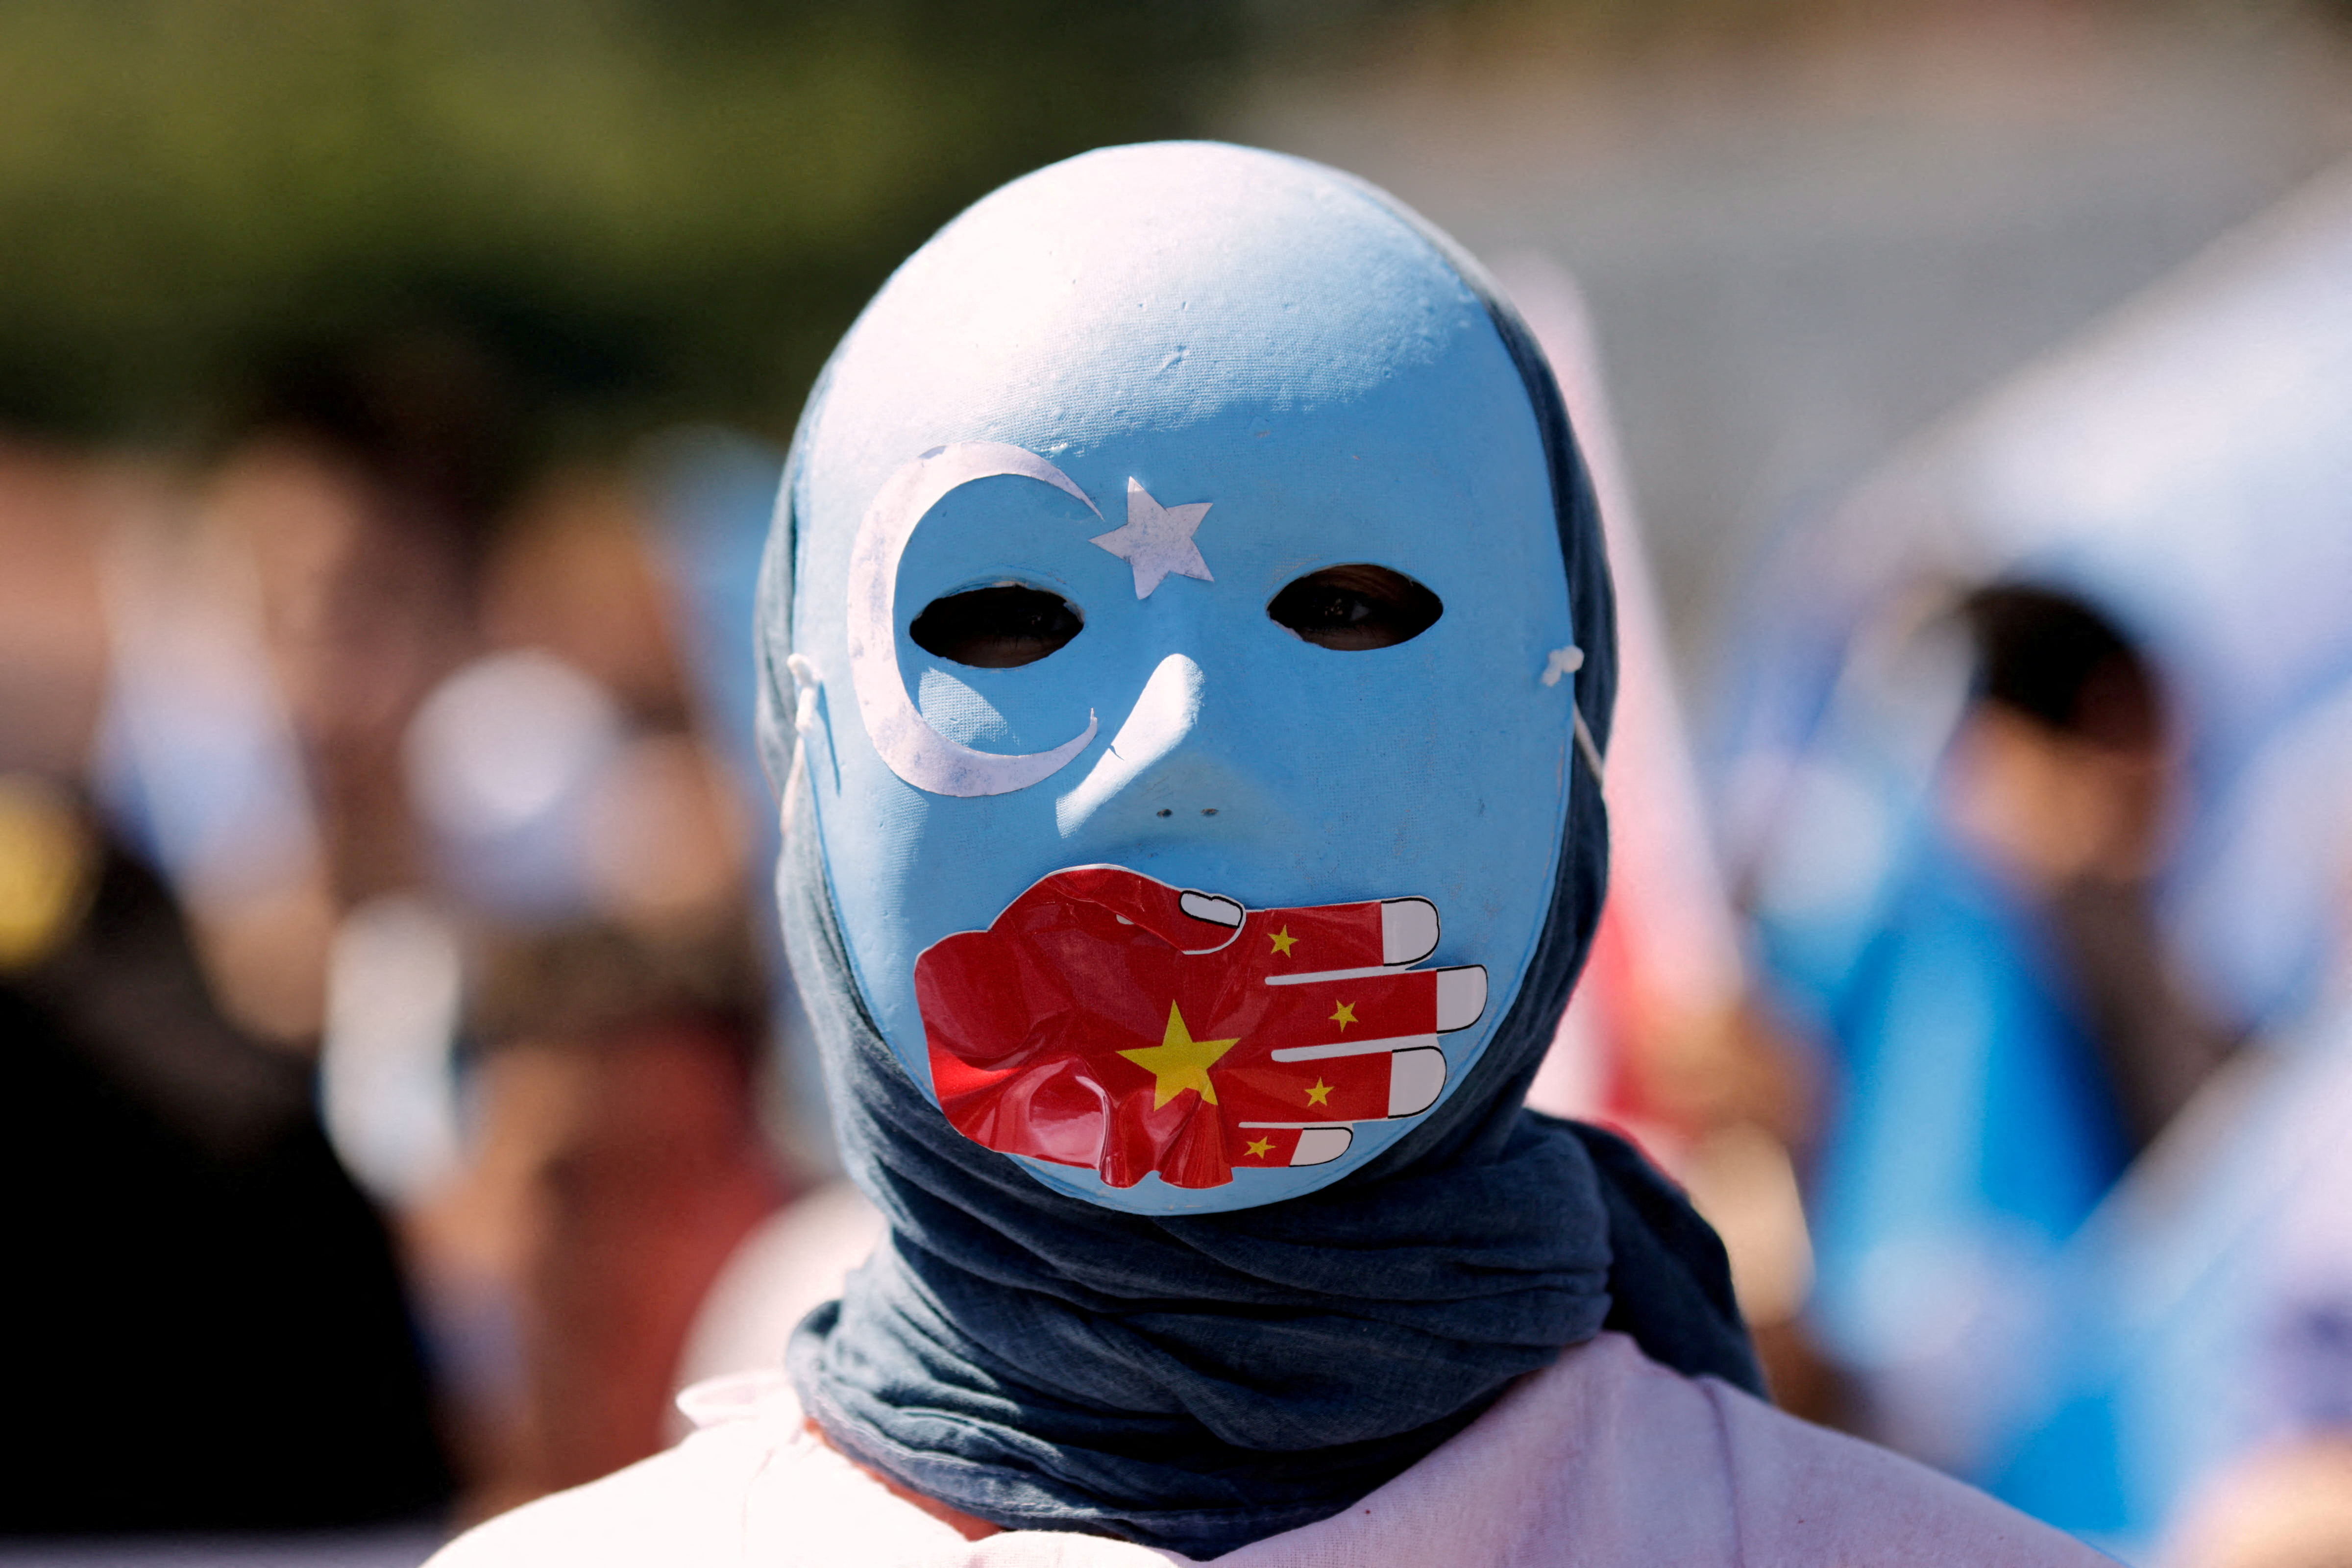 An ethnic Uyghur demonstrator wearing a mask takes part in a protest against China near the Chinese consulate in Istanbul